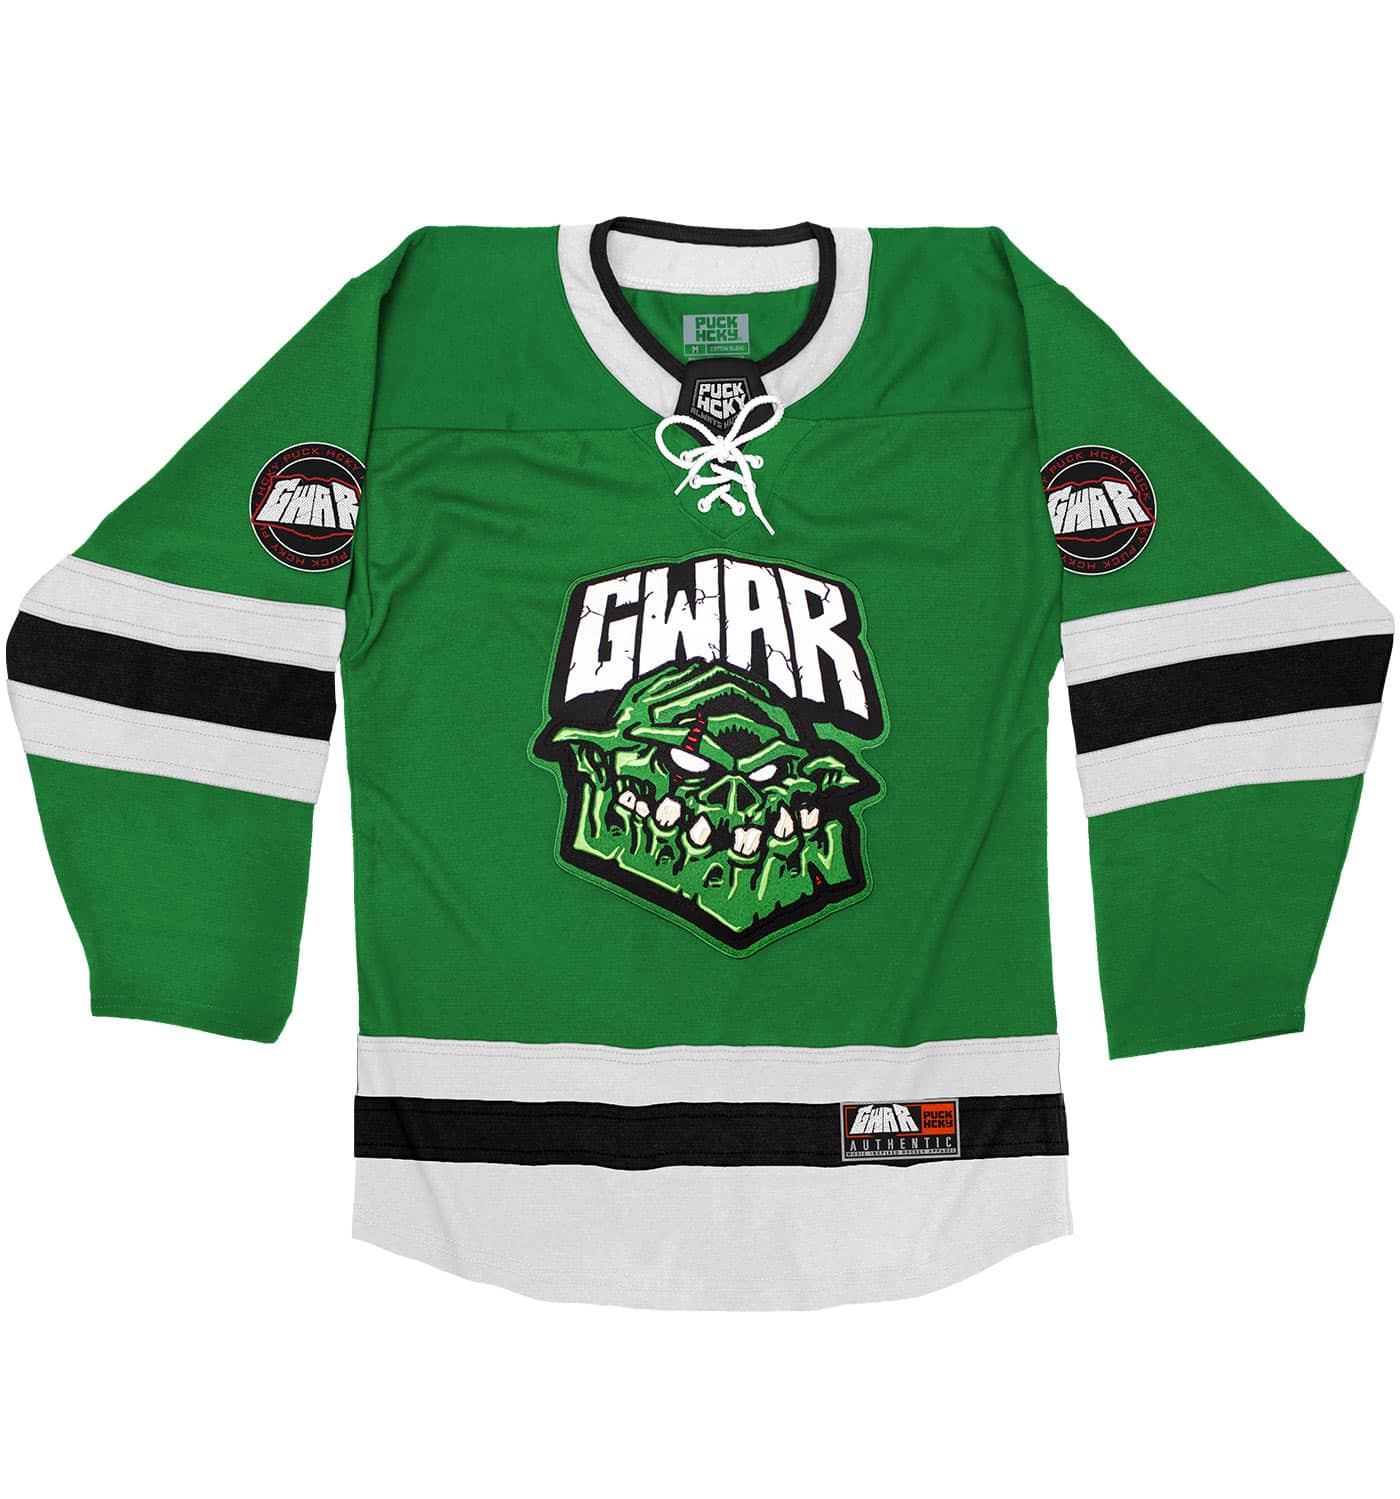 GWAR 'THE BONESNAPPER' deluxe hockey jersey in kelly green, white, and black front view